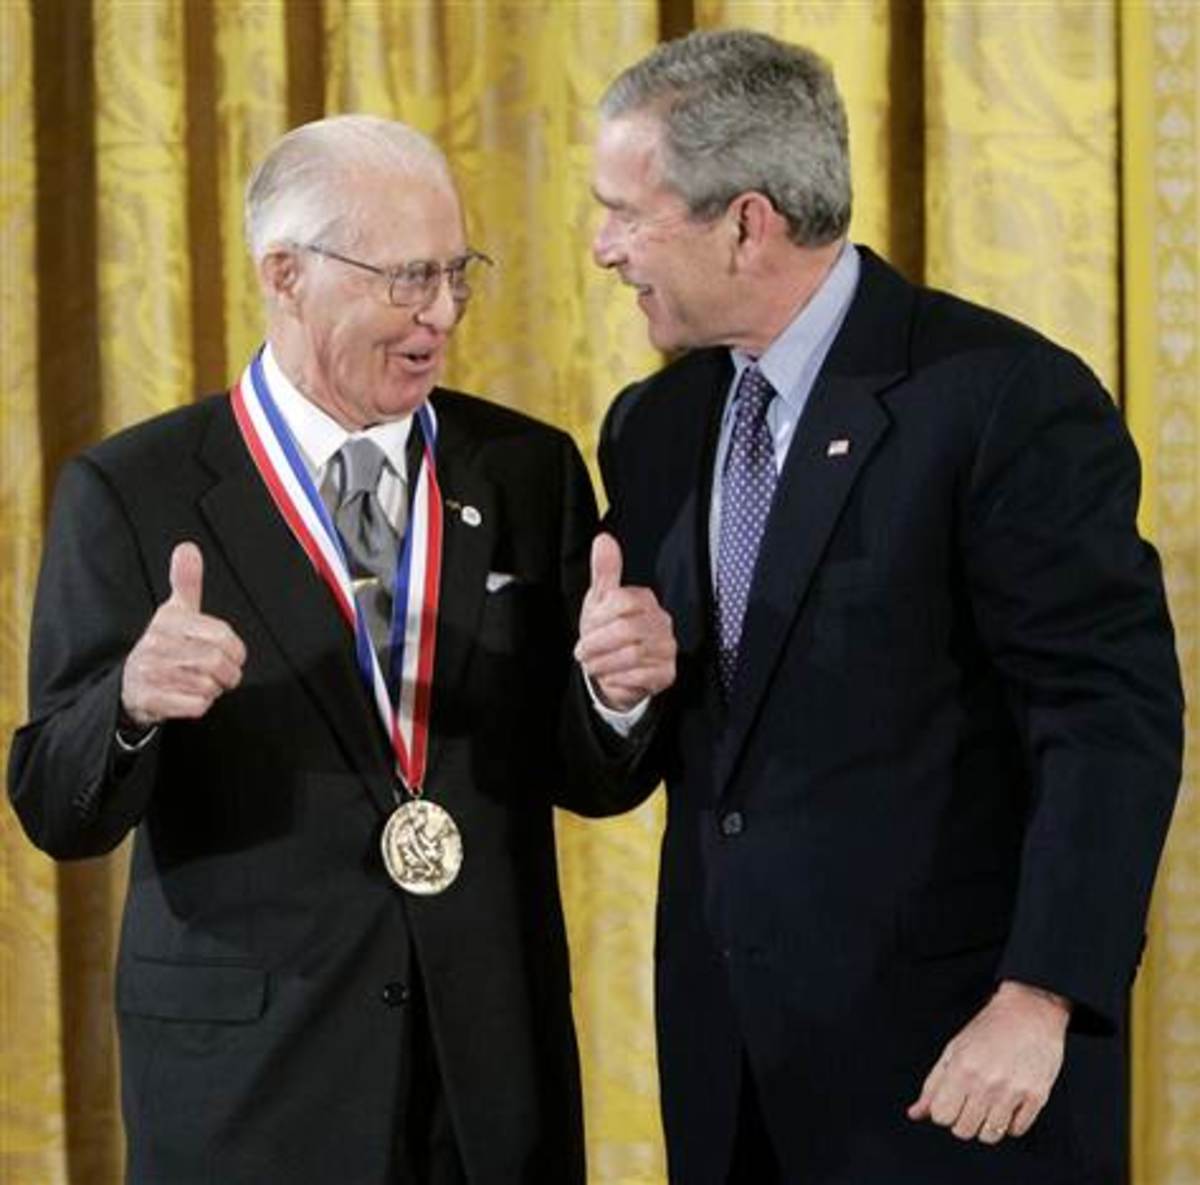 Ralph H. Baer receiving the National Medal of Technology from President George W. Bush, on February 13, 2006.